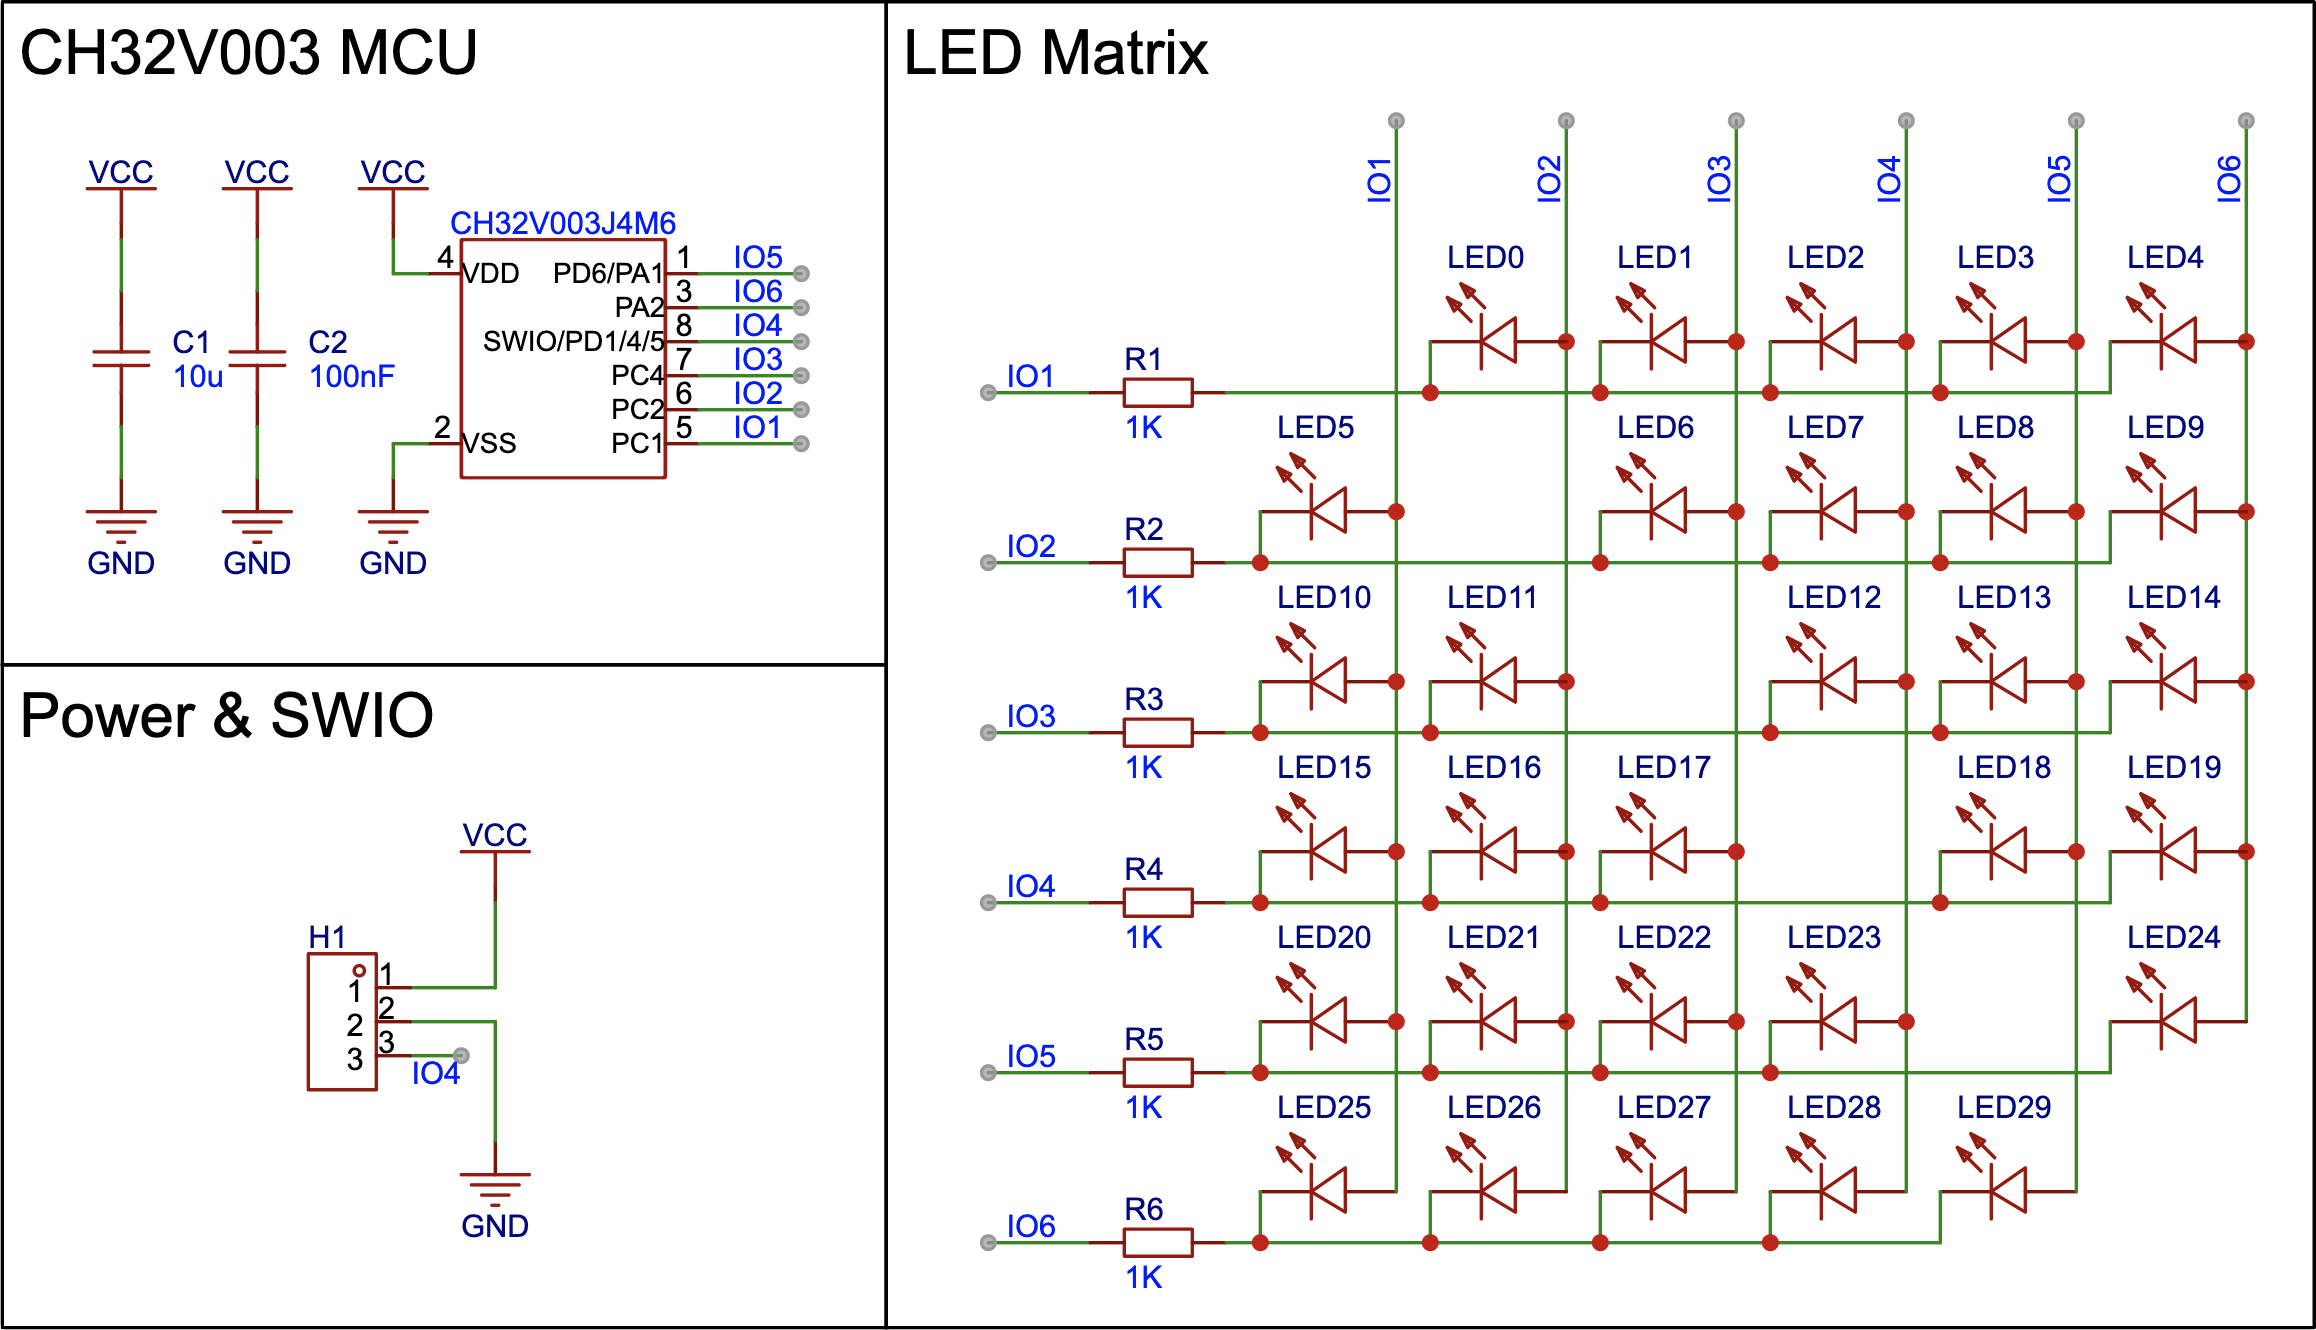 CH32V003_Tristate_Multiplexing_LED_Schematic.png